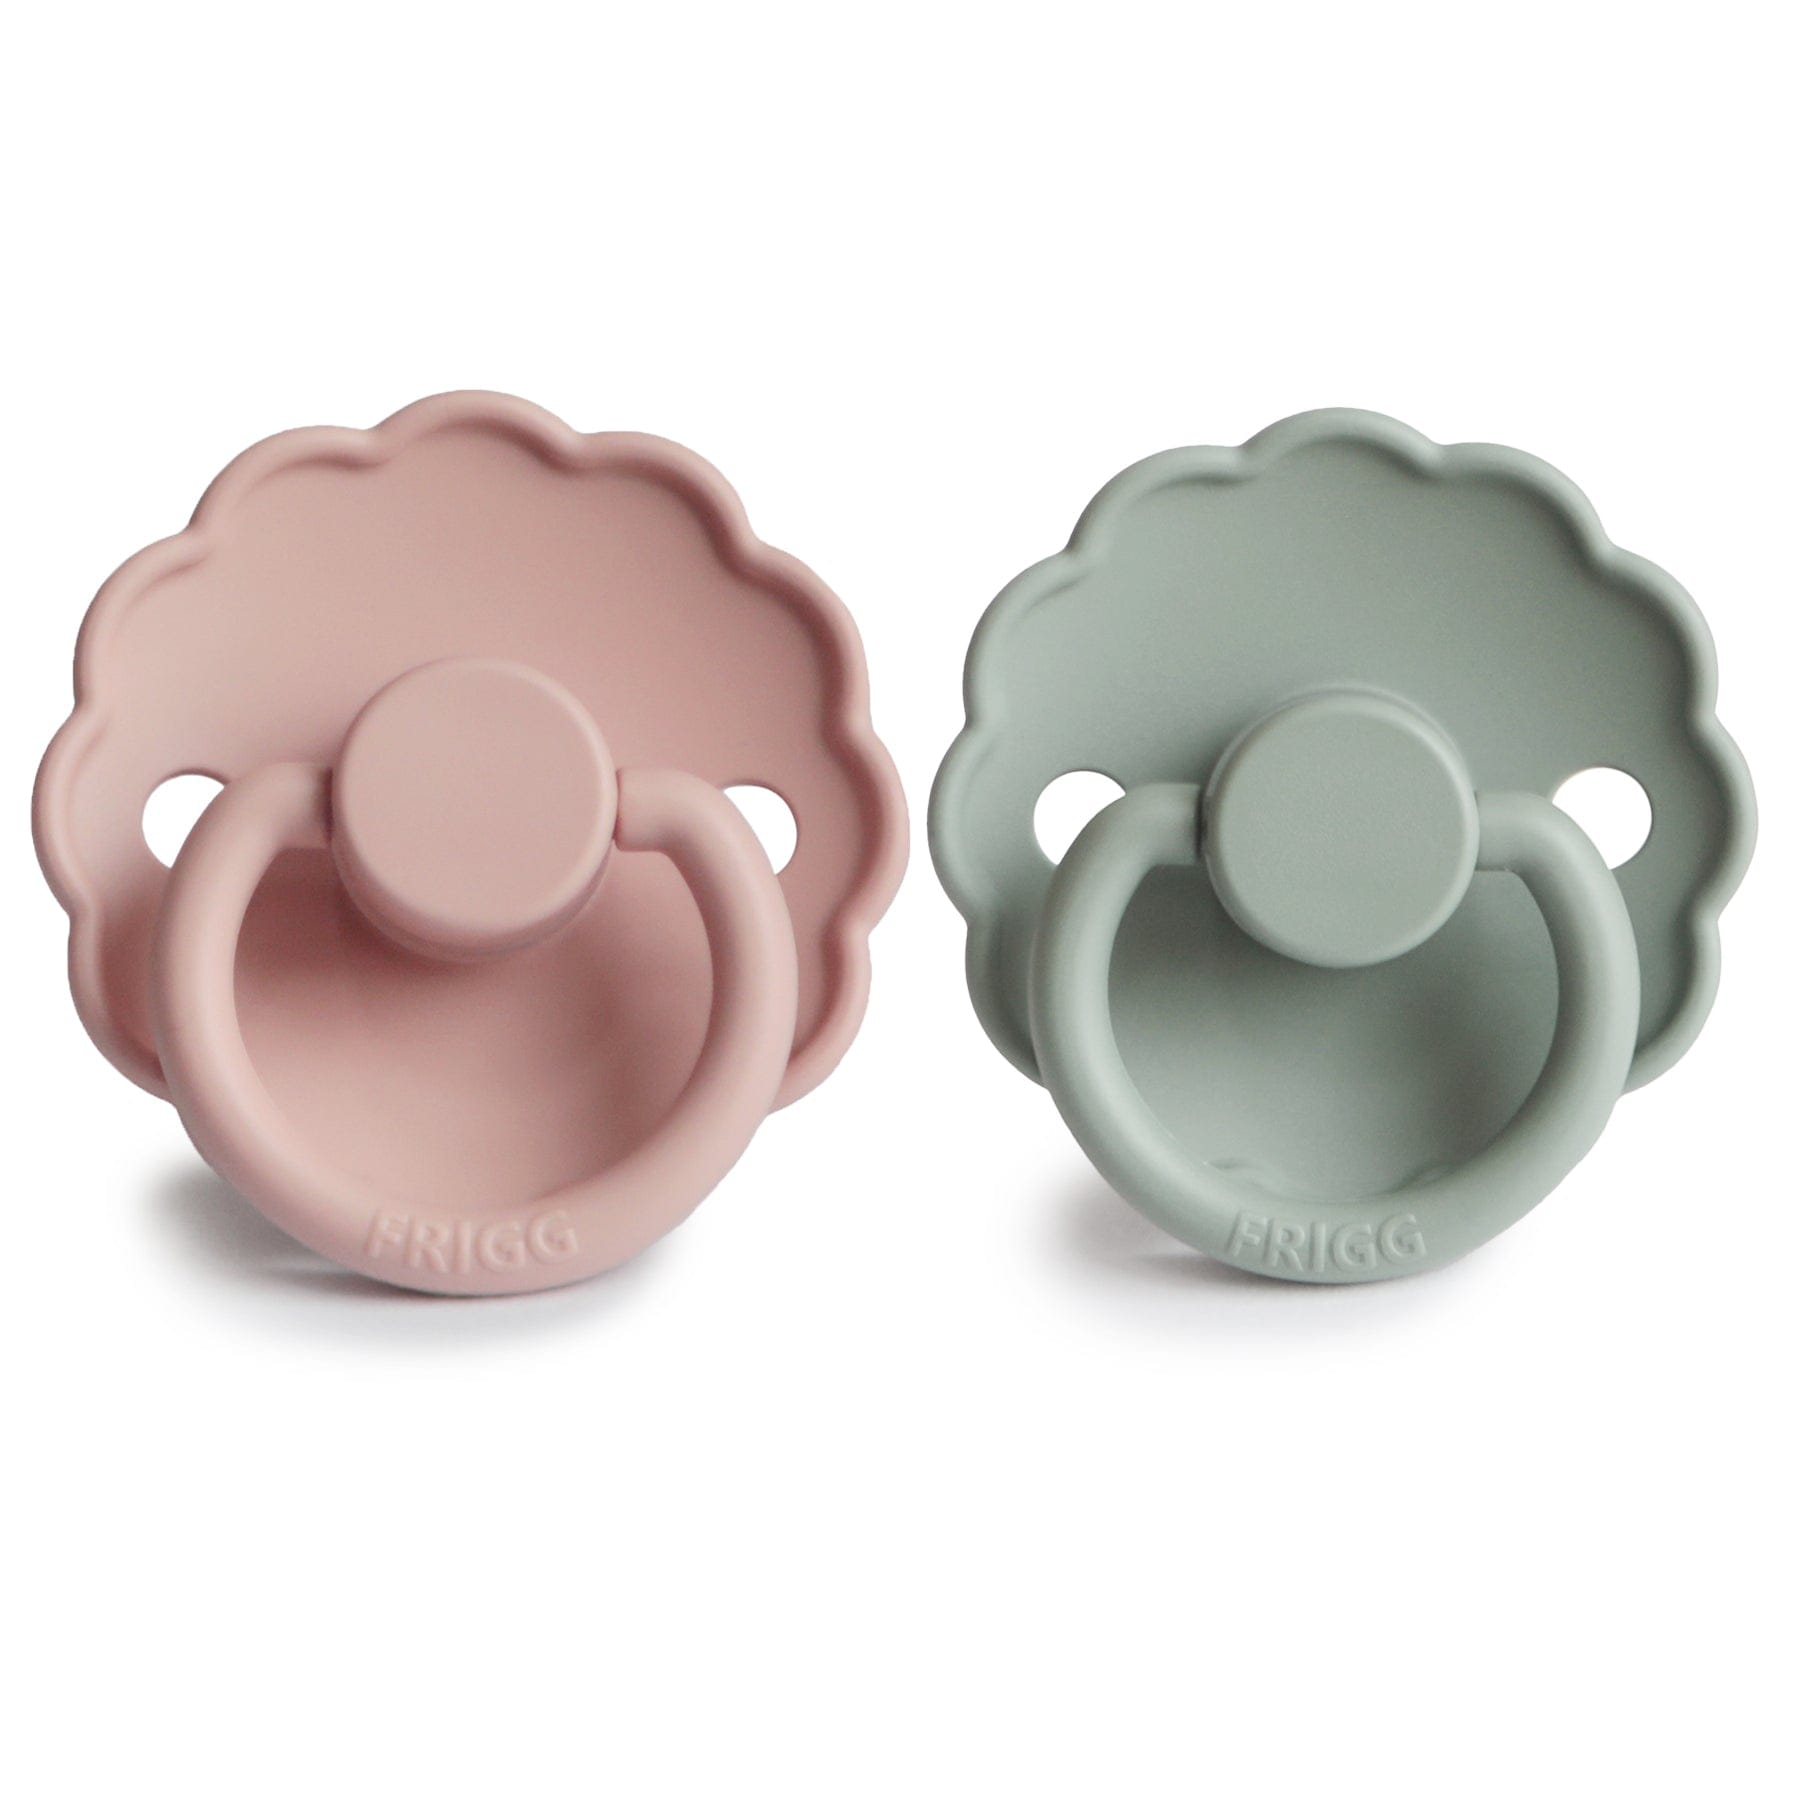 Frigg Baby Accessory Sage/Blush Frigg Daisy Silicone Pacifier - Size 1